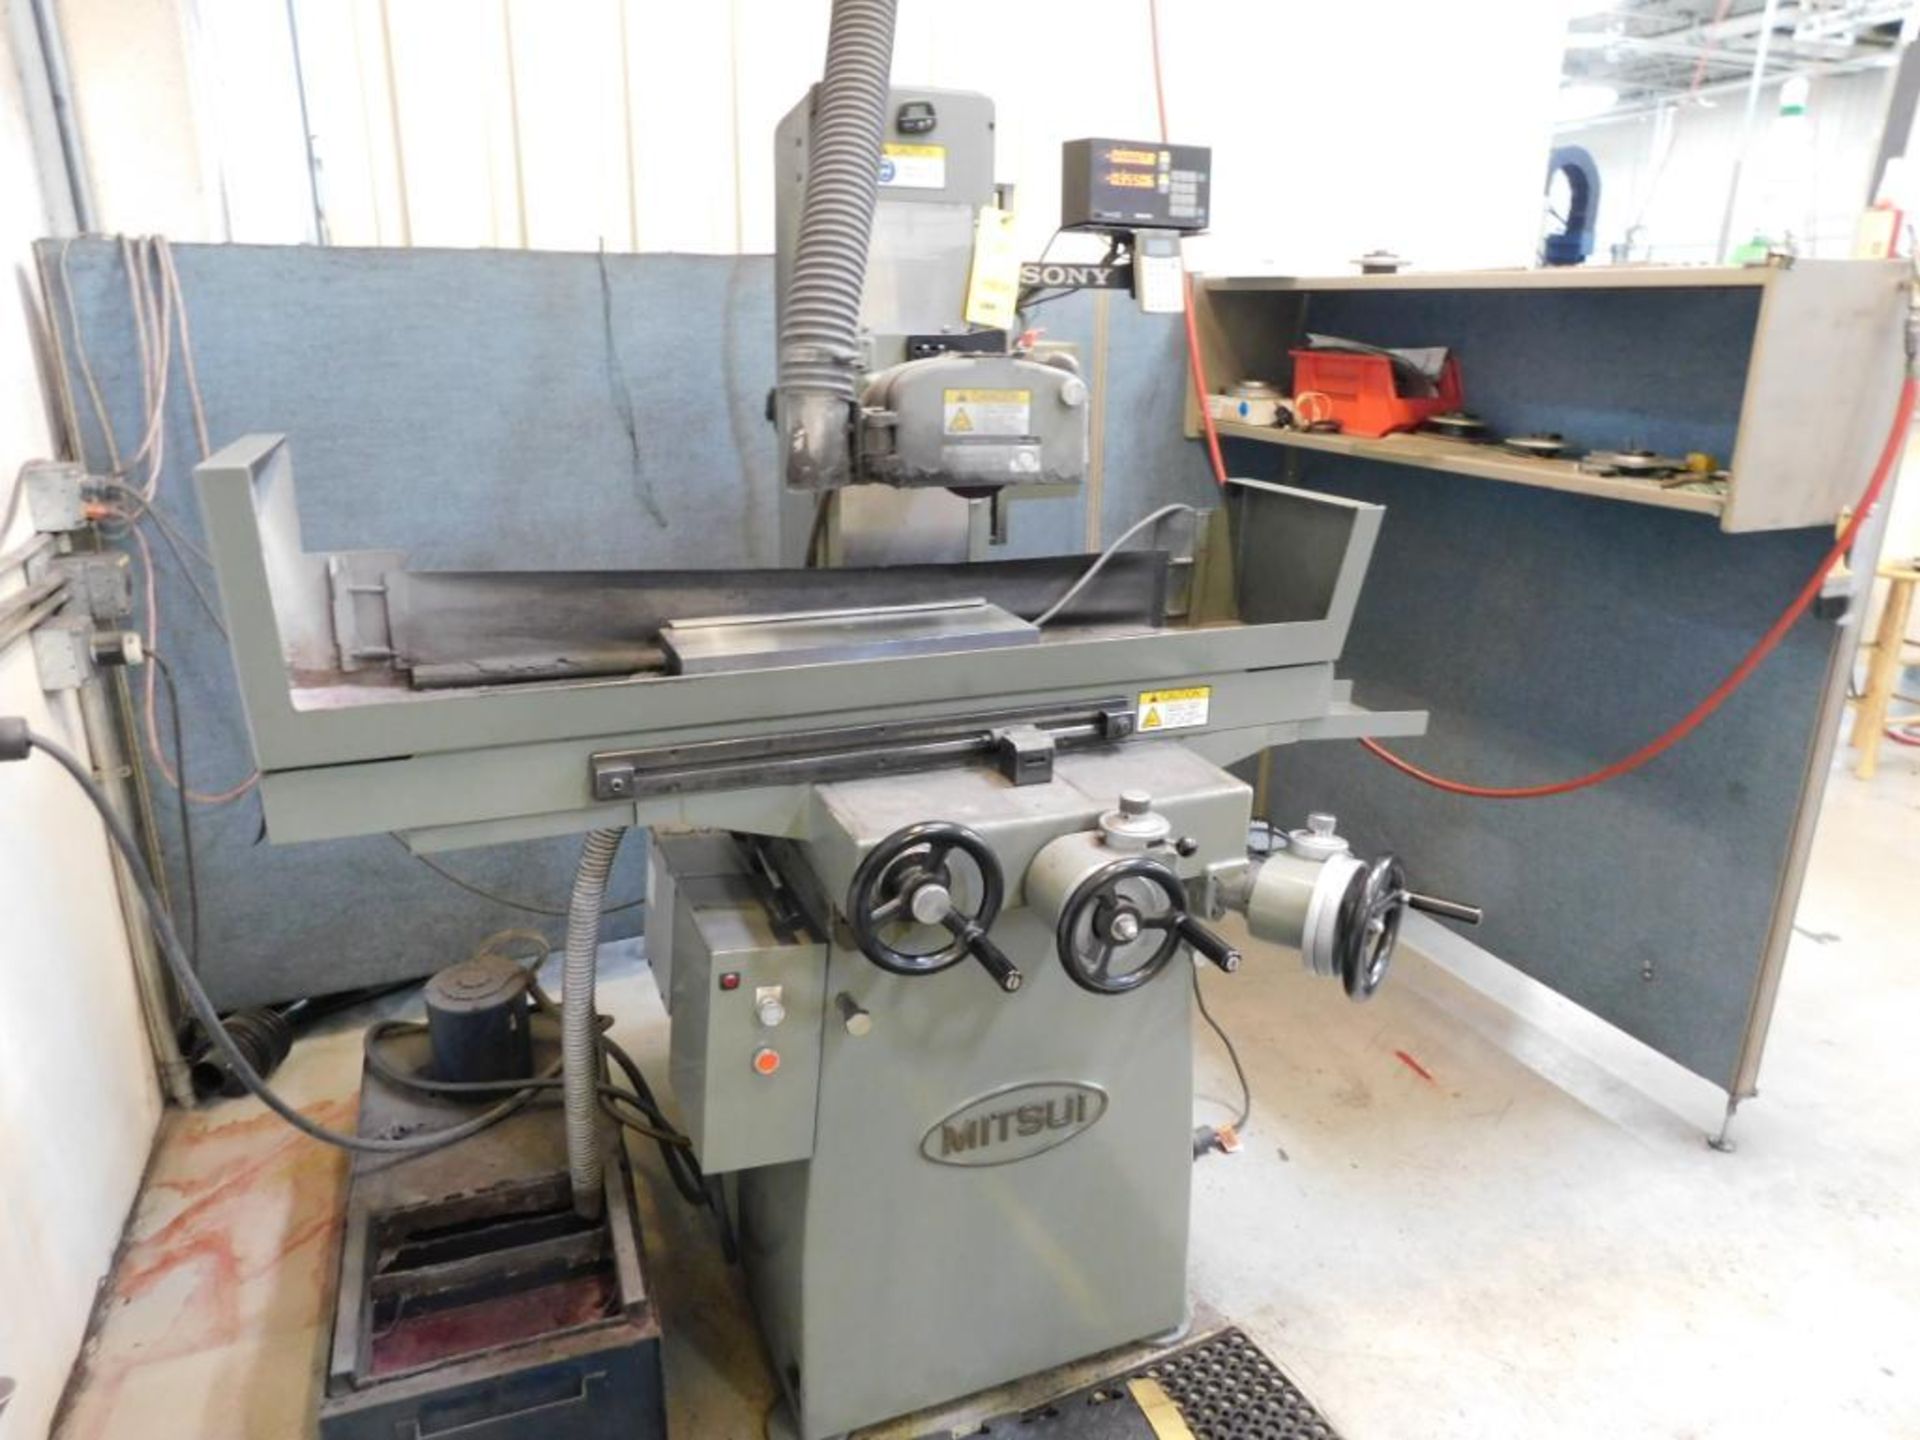 Mitsui 6 in. x 18 in. Surface Grinder, Model MSG-205MH, S/N 2002033586, 6 in. x 18 in. Electromagnet - Image 2 of 3